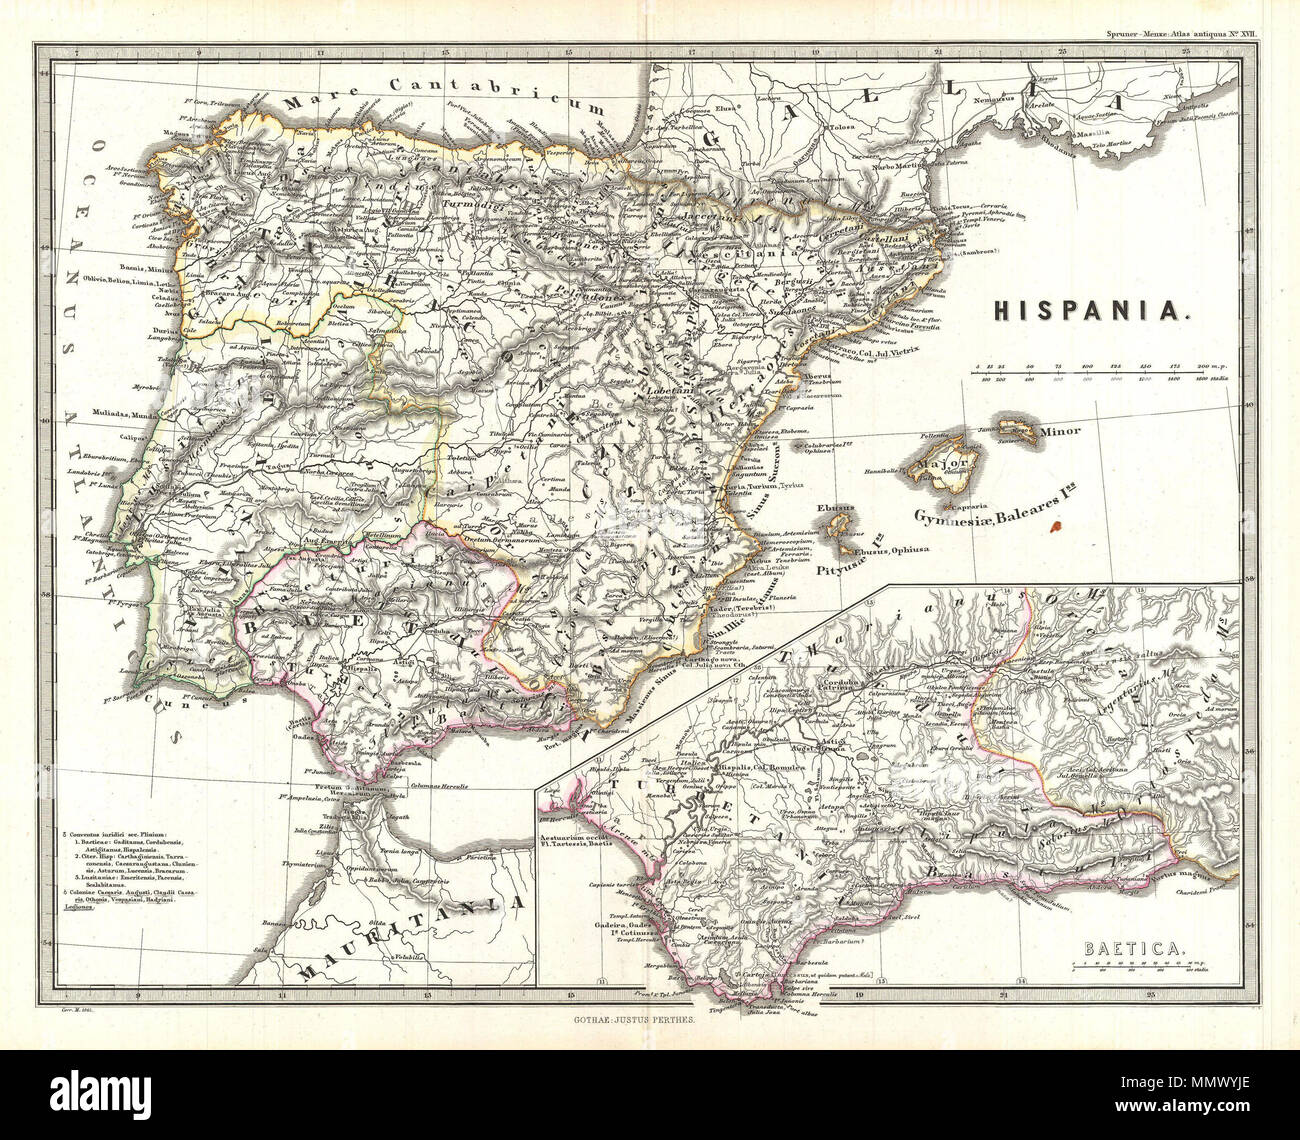 .  English: This is Karl von Spruner’s 1865 map of Hispania (modern day Spain and Portugal). Under the Roman Republic, Hispania or Iberia was divided into two provinces: Hispania Citerior and Hispania Ulterior –both of which are noted here. Later, during the Roman Principate, Hispania Ulterior was divided into two new provinces, Baetica and Lusitania, while Hispania Citerior was renamed Tarraconensis, which is illustrated on this map. Spruner also includes a detailed inset, showing Hispania Baetica (modern day Andalucía), one of three Imperial Roman provinces in Hispania, (modern Iberia). Hisp Stock Photo